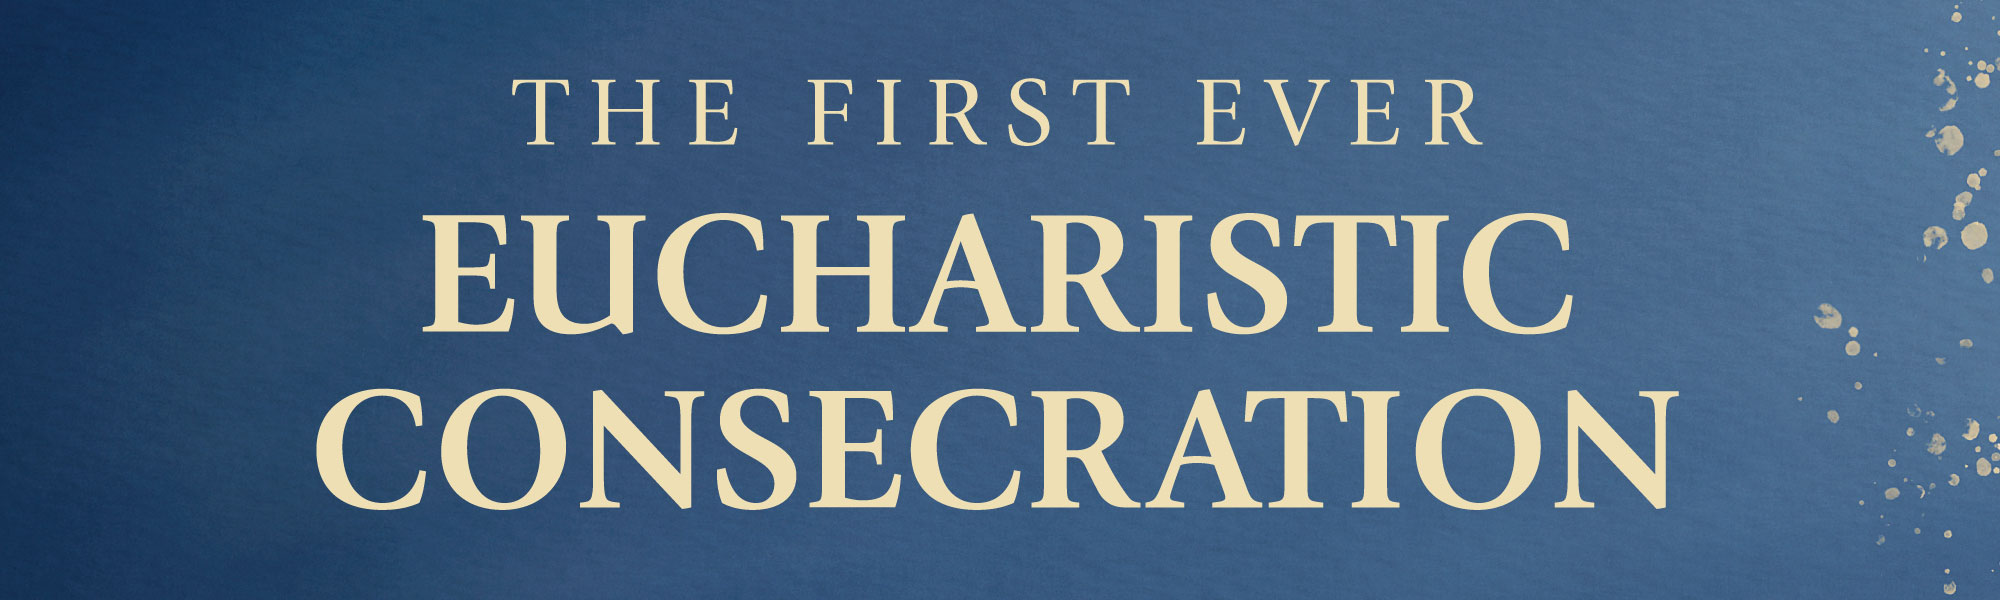 Image of the following text: The First Ever Eucharistic Consecration